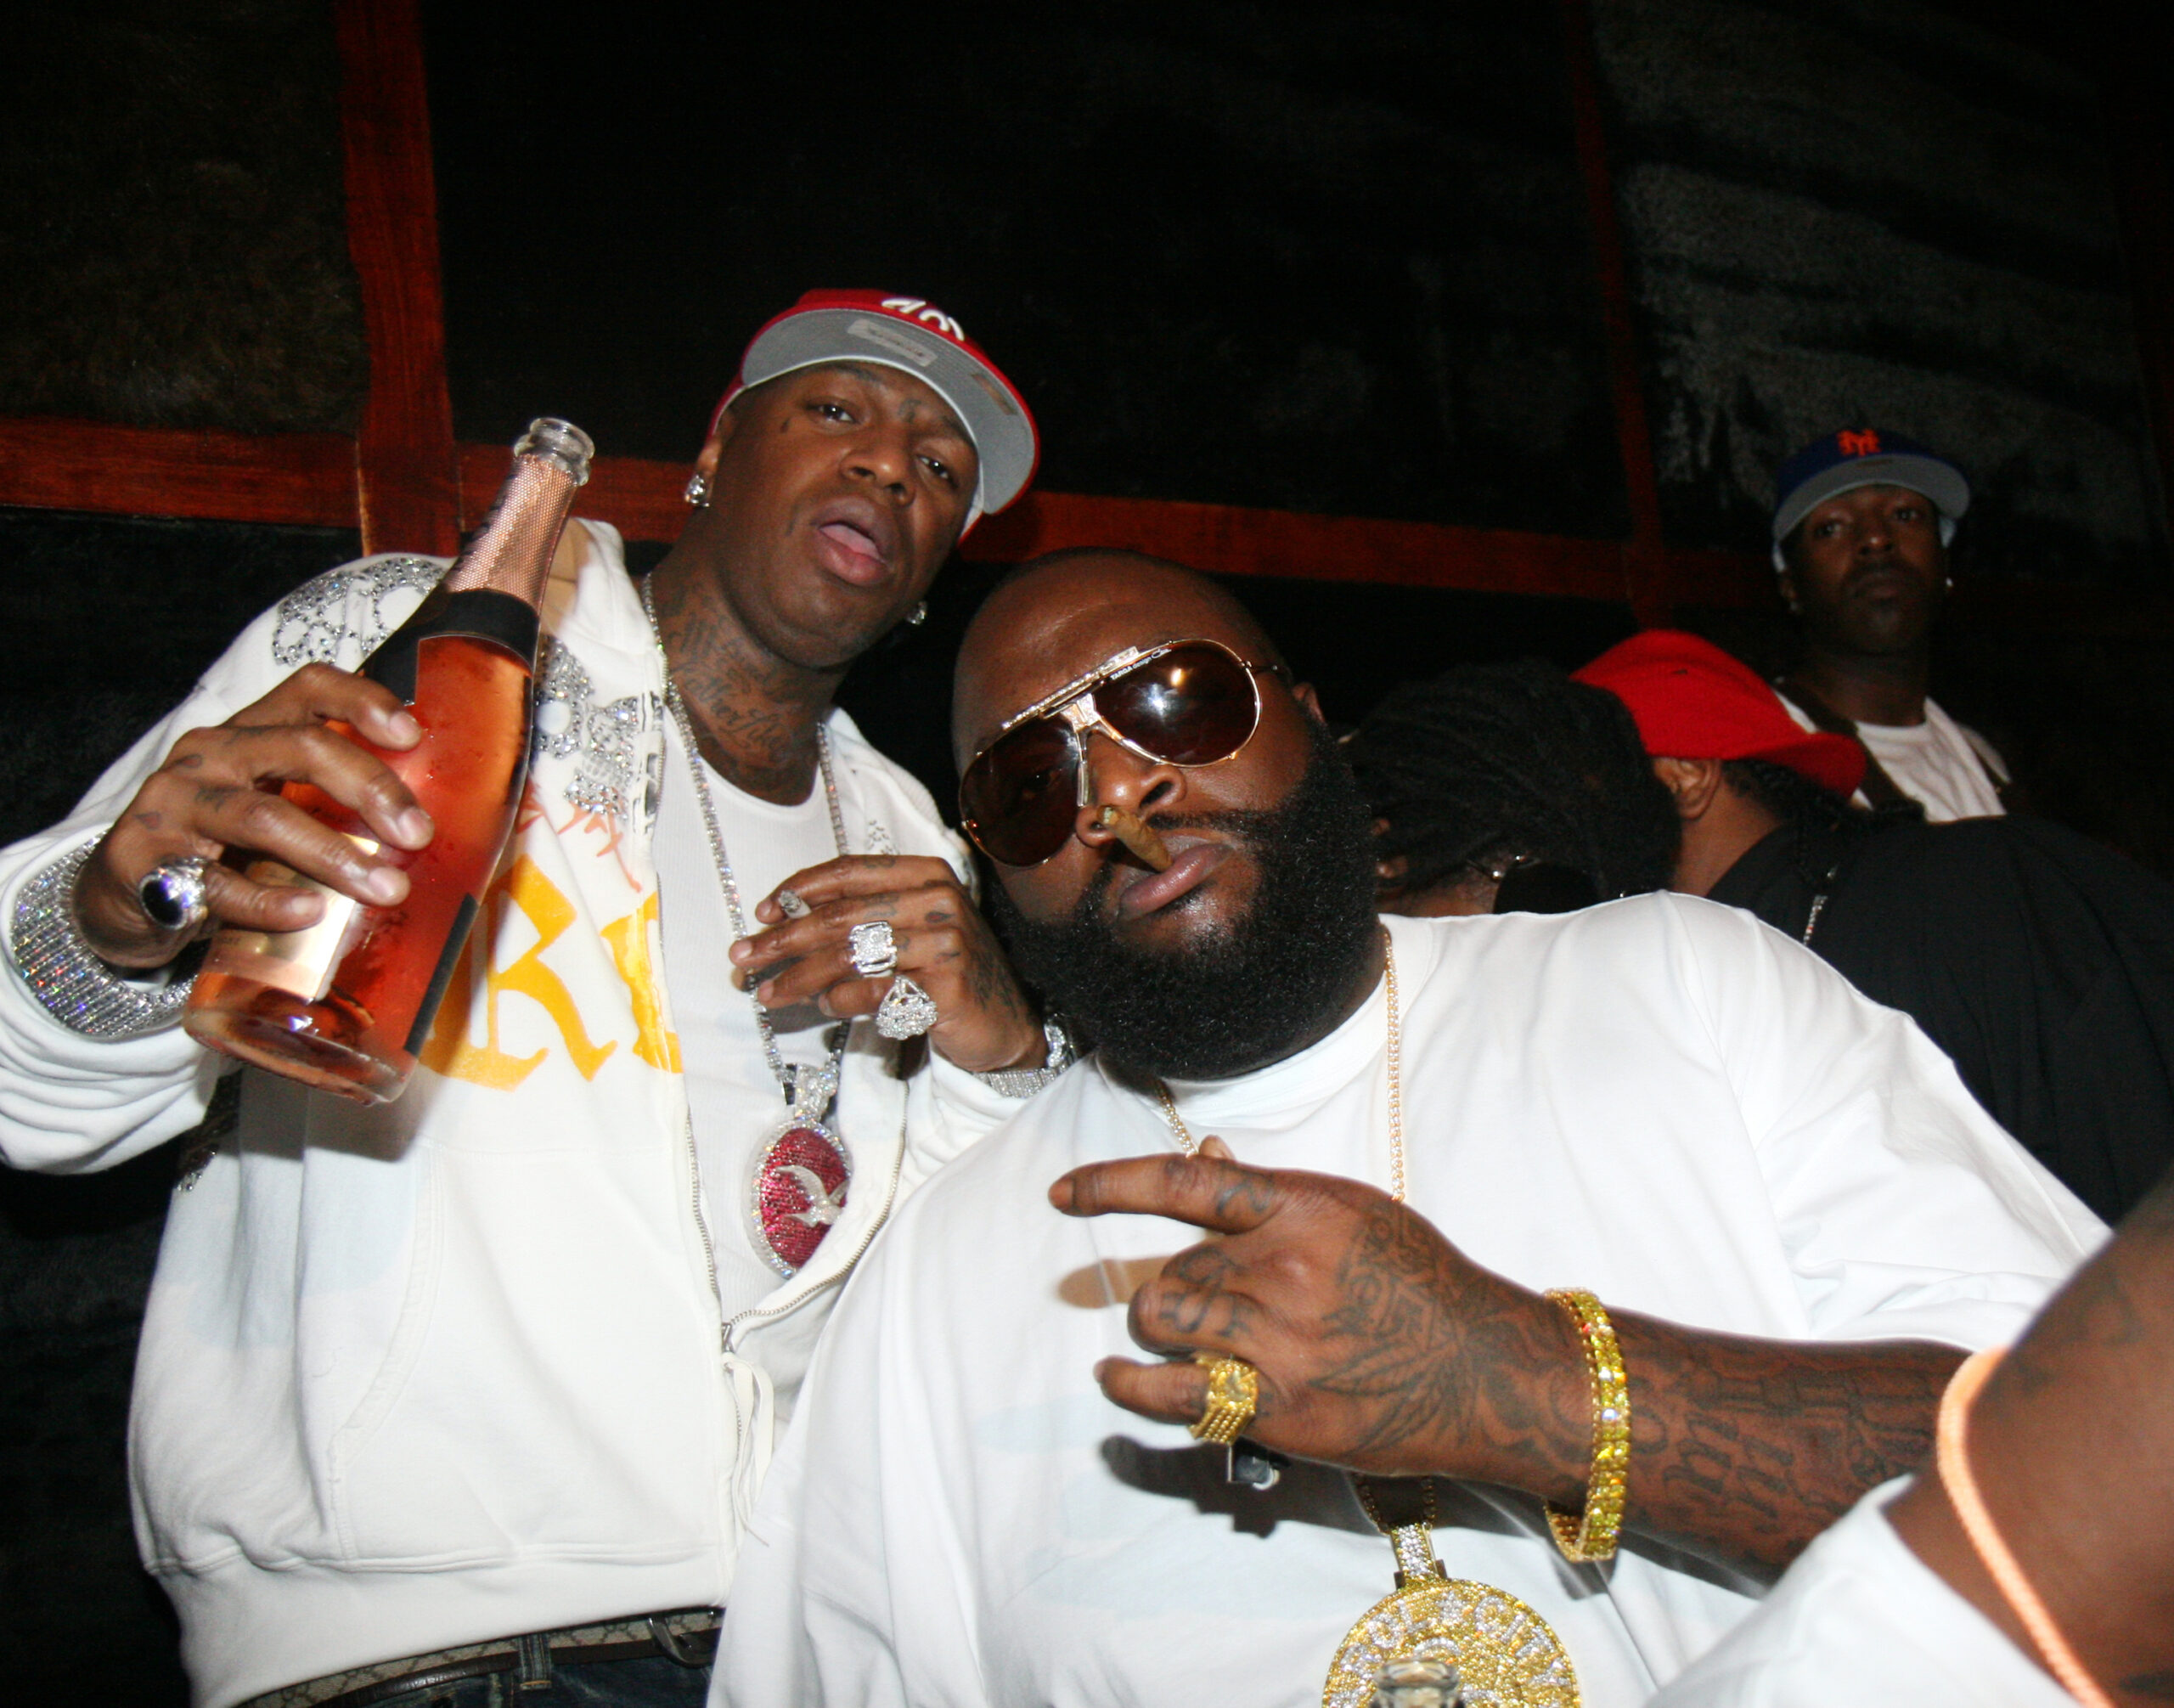 Birdman & Rick Ross Have No Relationship, Former Confirms There's No Drama  Between Them